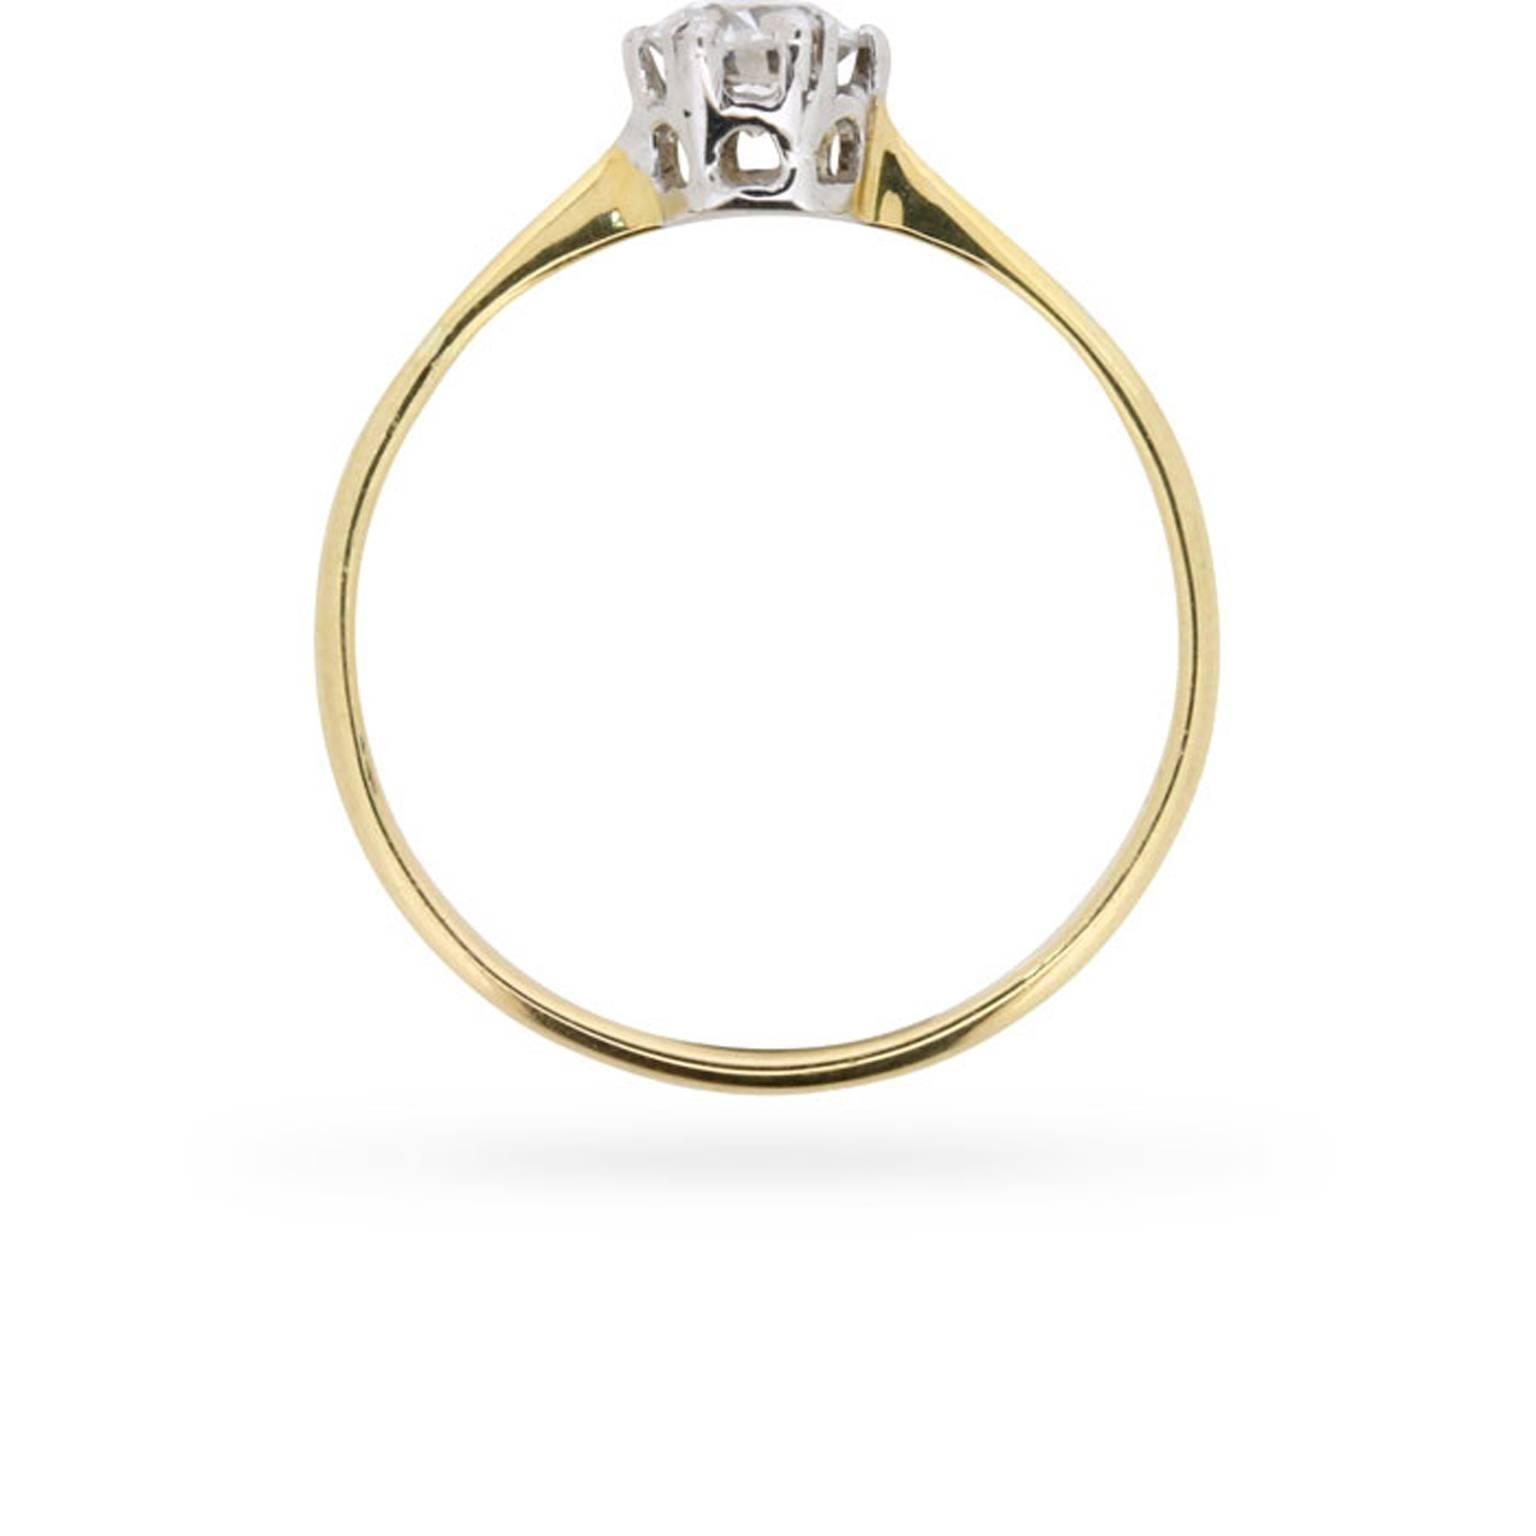 An old cut diamond weighing 0.50 carats is simply and elegantly presented in its original two-tone platinum and 18 carat gold setting at the centre of this late Victorian era engagement ring.

This lovely antique stone has been graded to a desirable